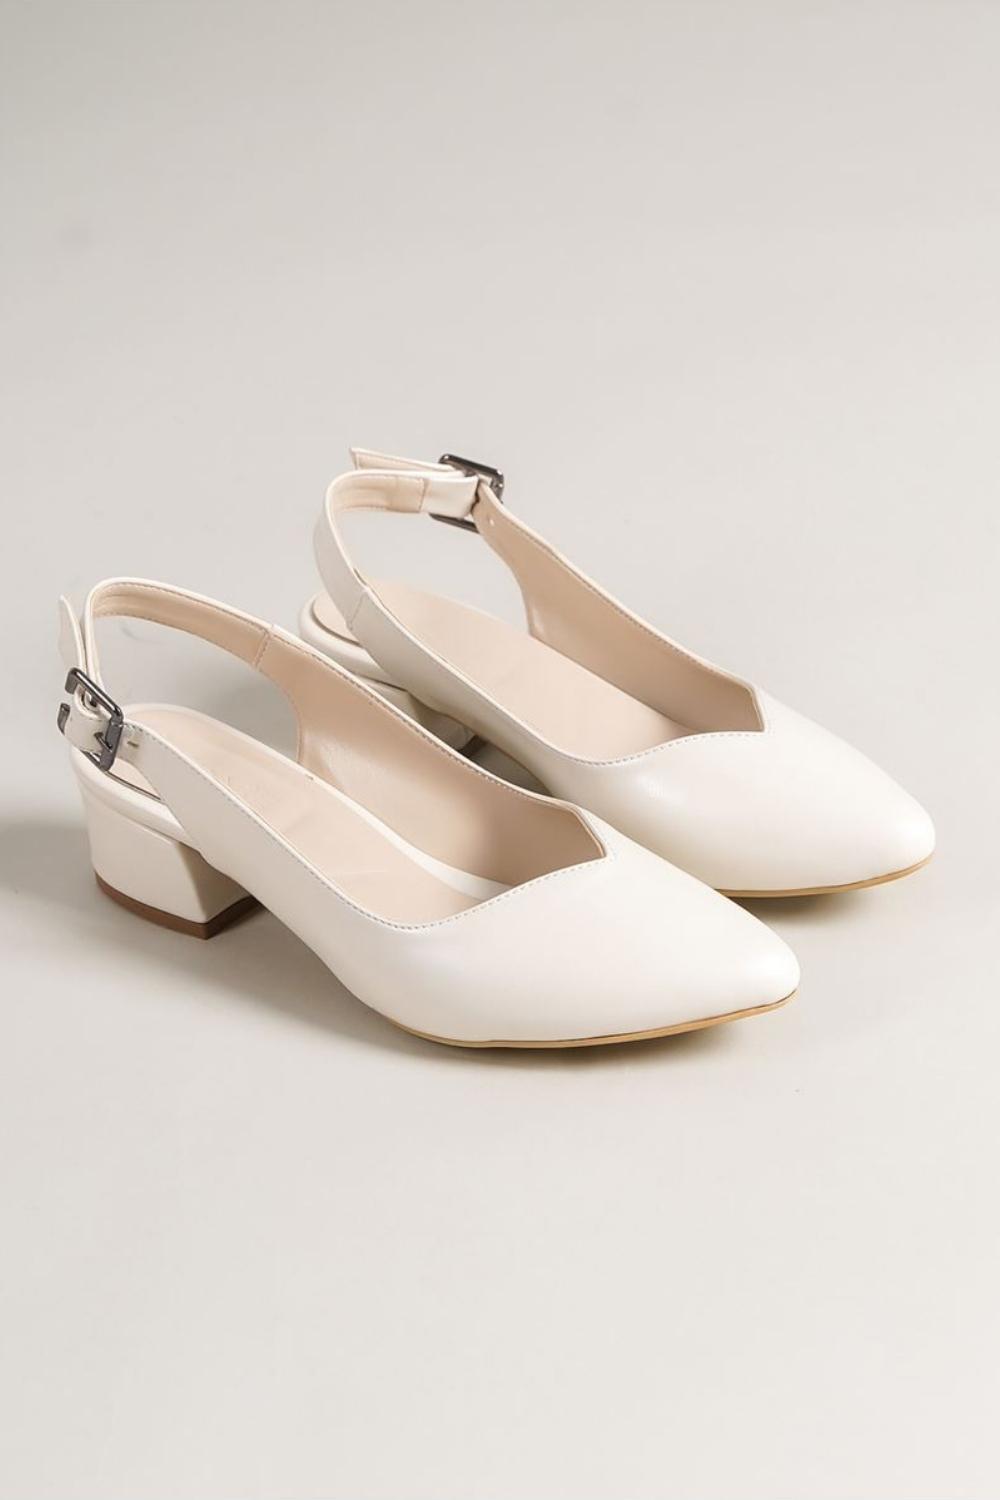 Valentina White Pearl Heels Women's Shoes - STREETMODE ™